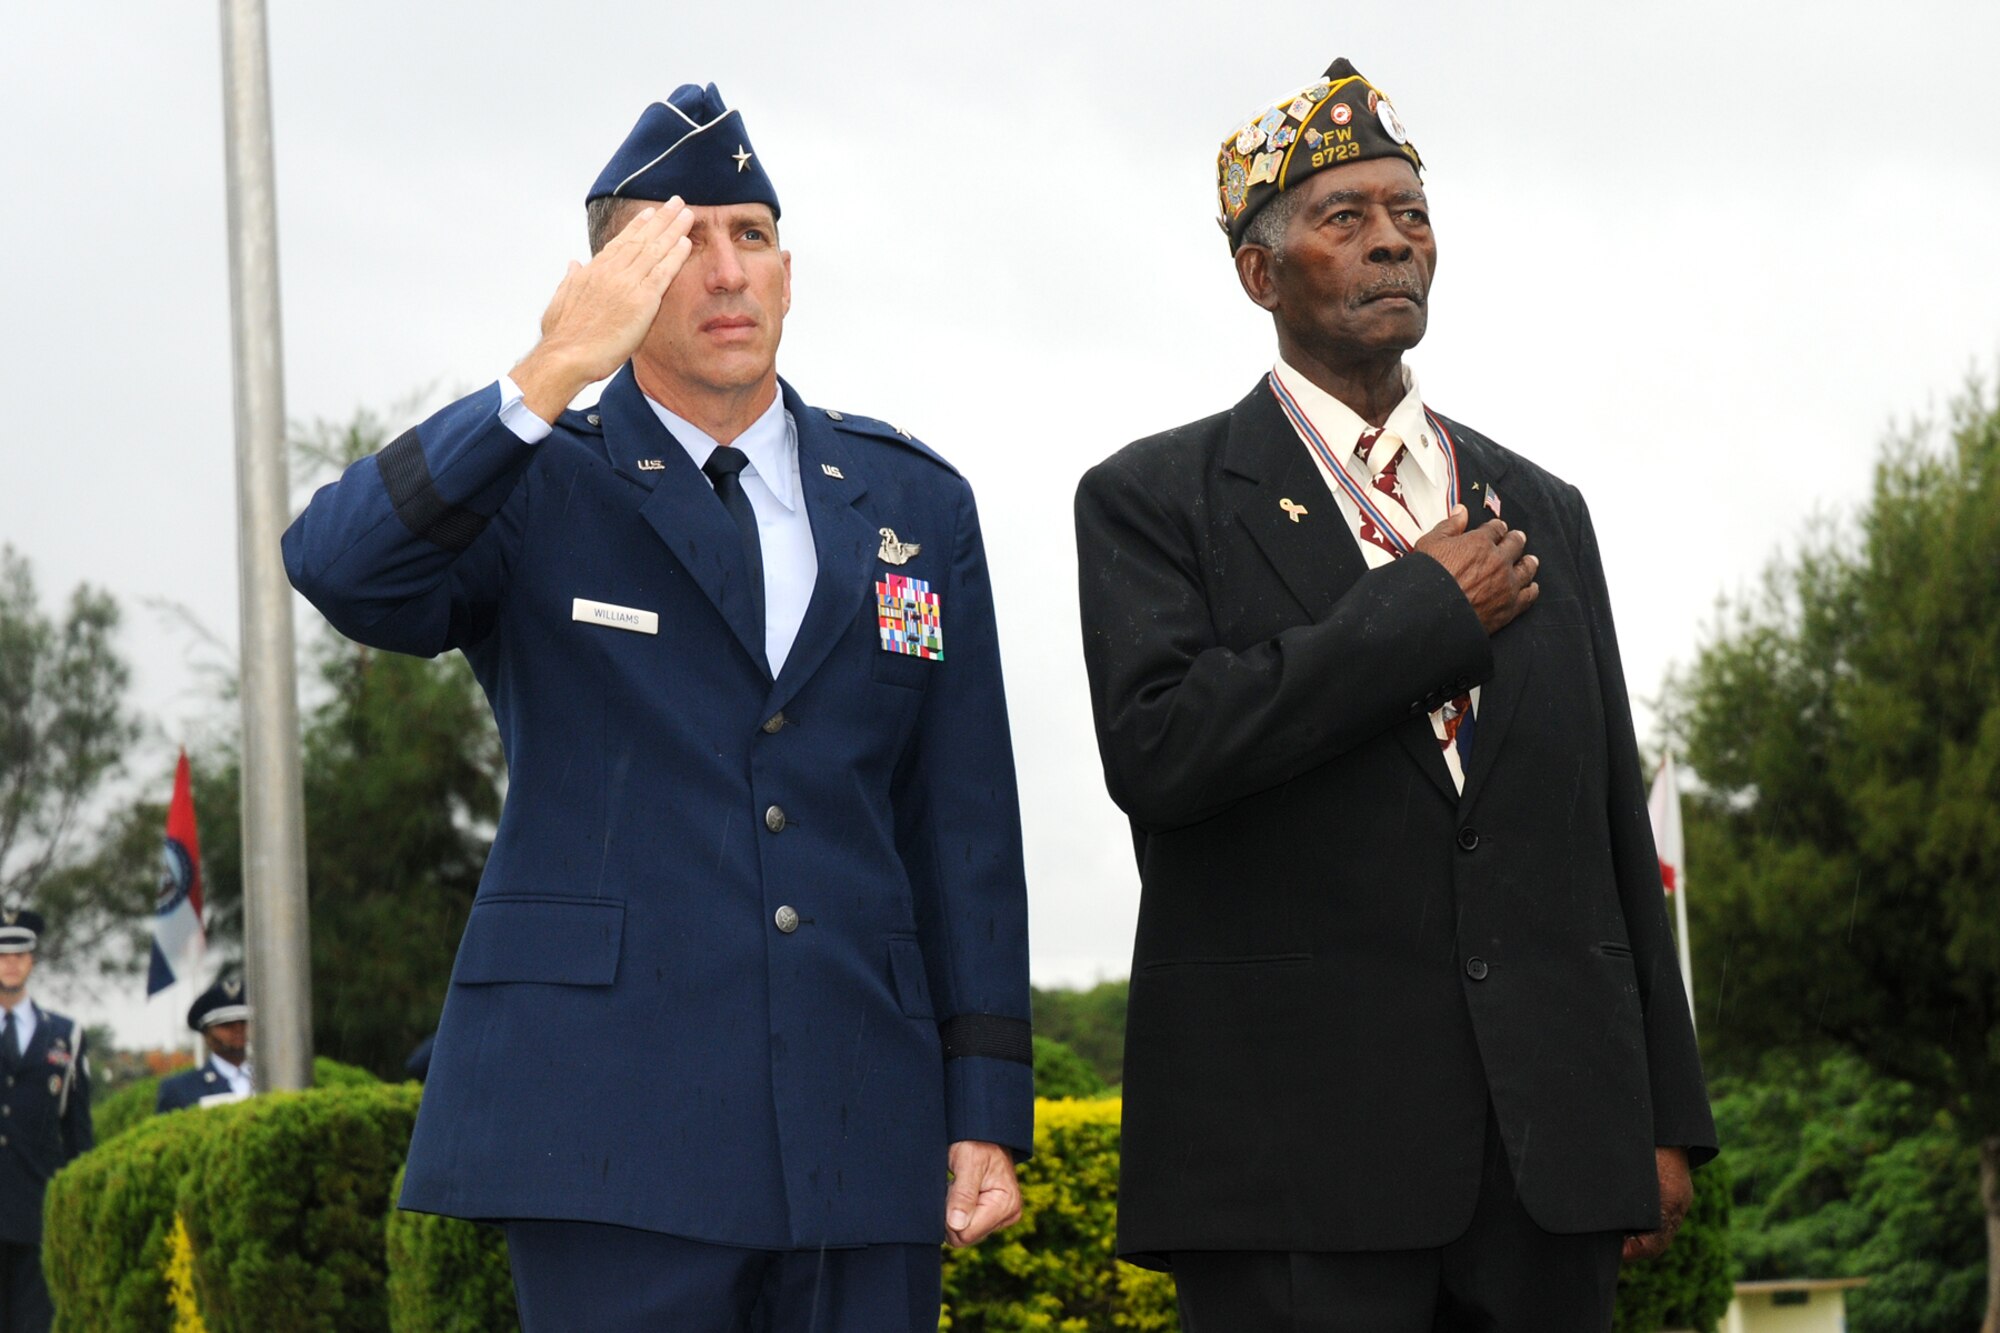 Brig. Gen. Brett T. Williams, 18th Wing commander, and United States Navy
veteran Petty Officer 3rd Class Harry J. Thomas, render courtesies during
the Veteran's Day Ceremony held at Kadena Air Base, Japan Nov. 11, 2008. The
ceremony was held to honor all who have served in defense of the United
States of America. (U.S. Air Force photo/Airman 1st Class Chad Warren)
